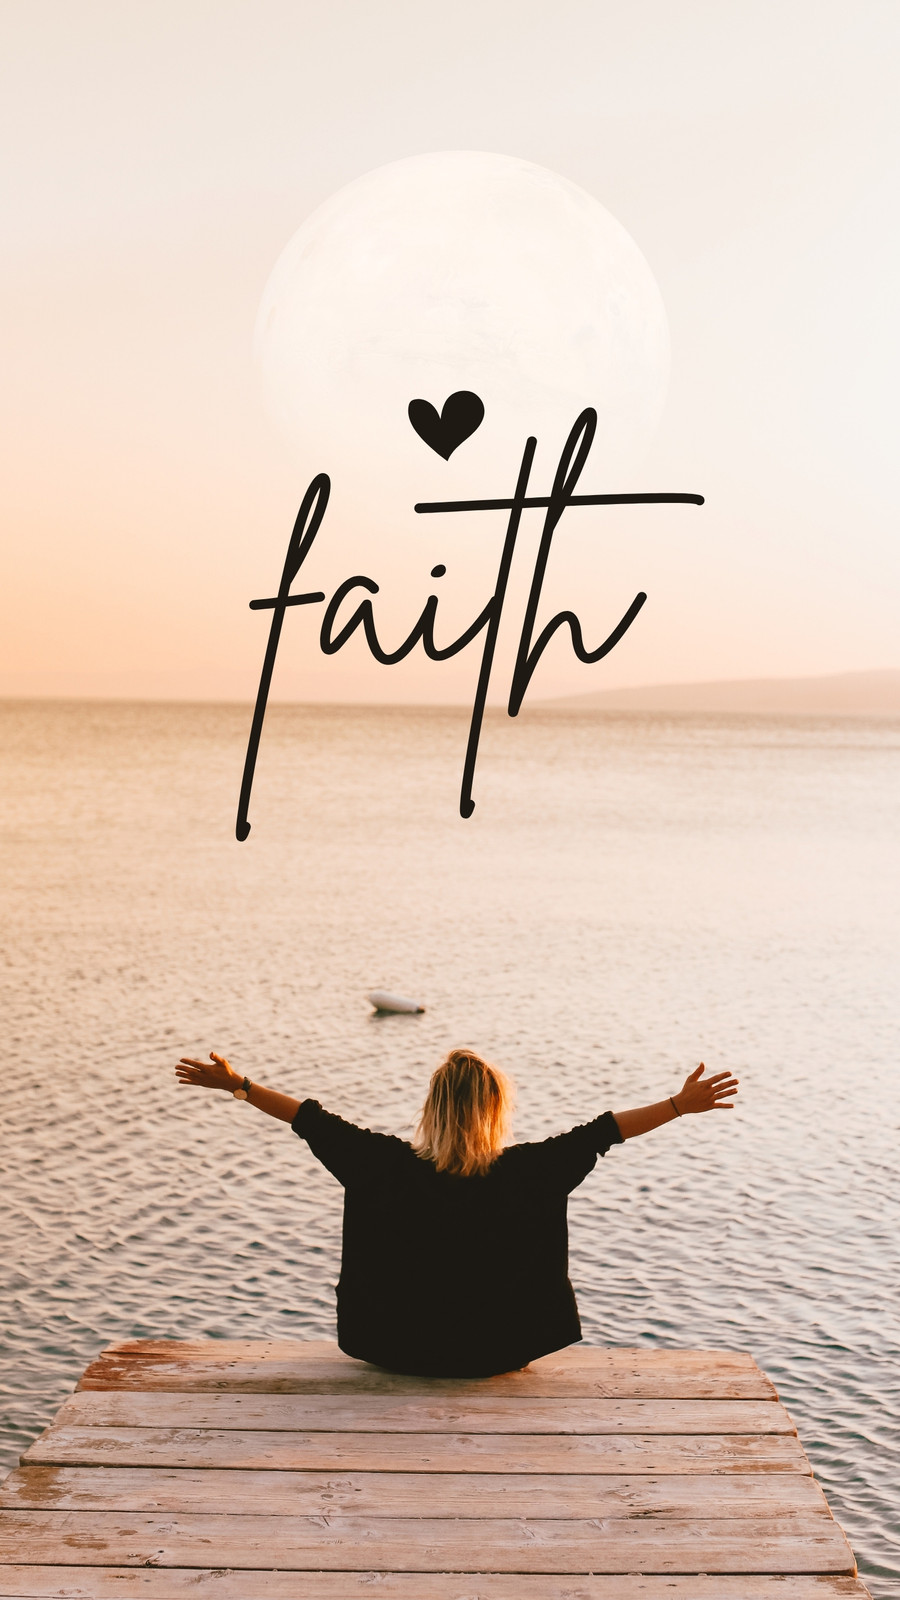 Faith Background Images, HD Pictures For Free Vectors Download - Lovepik.com